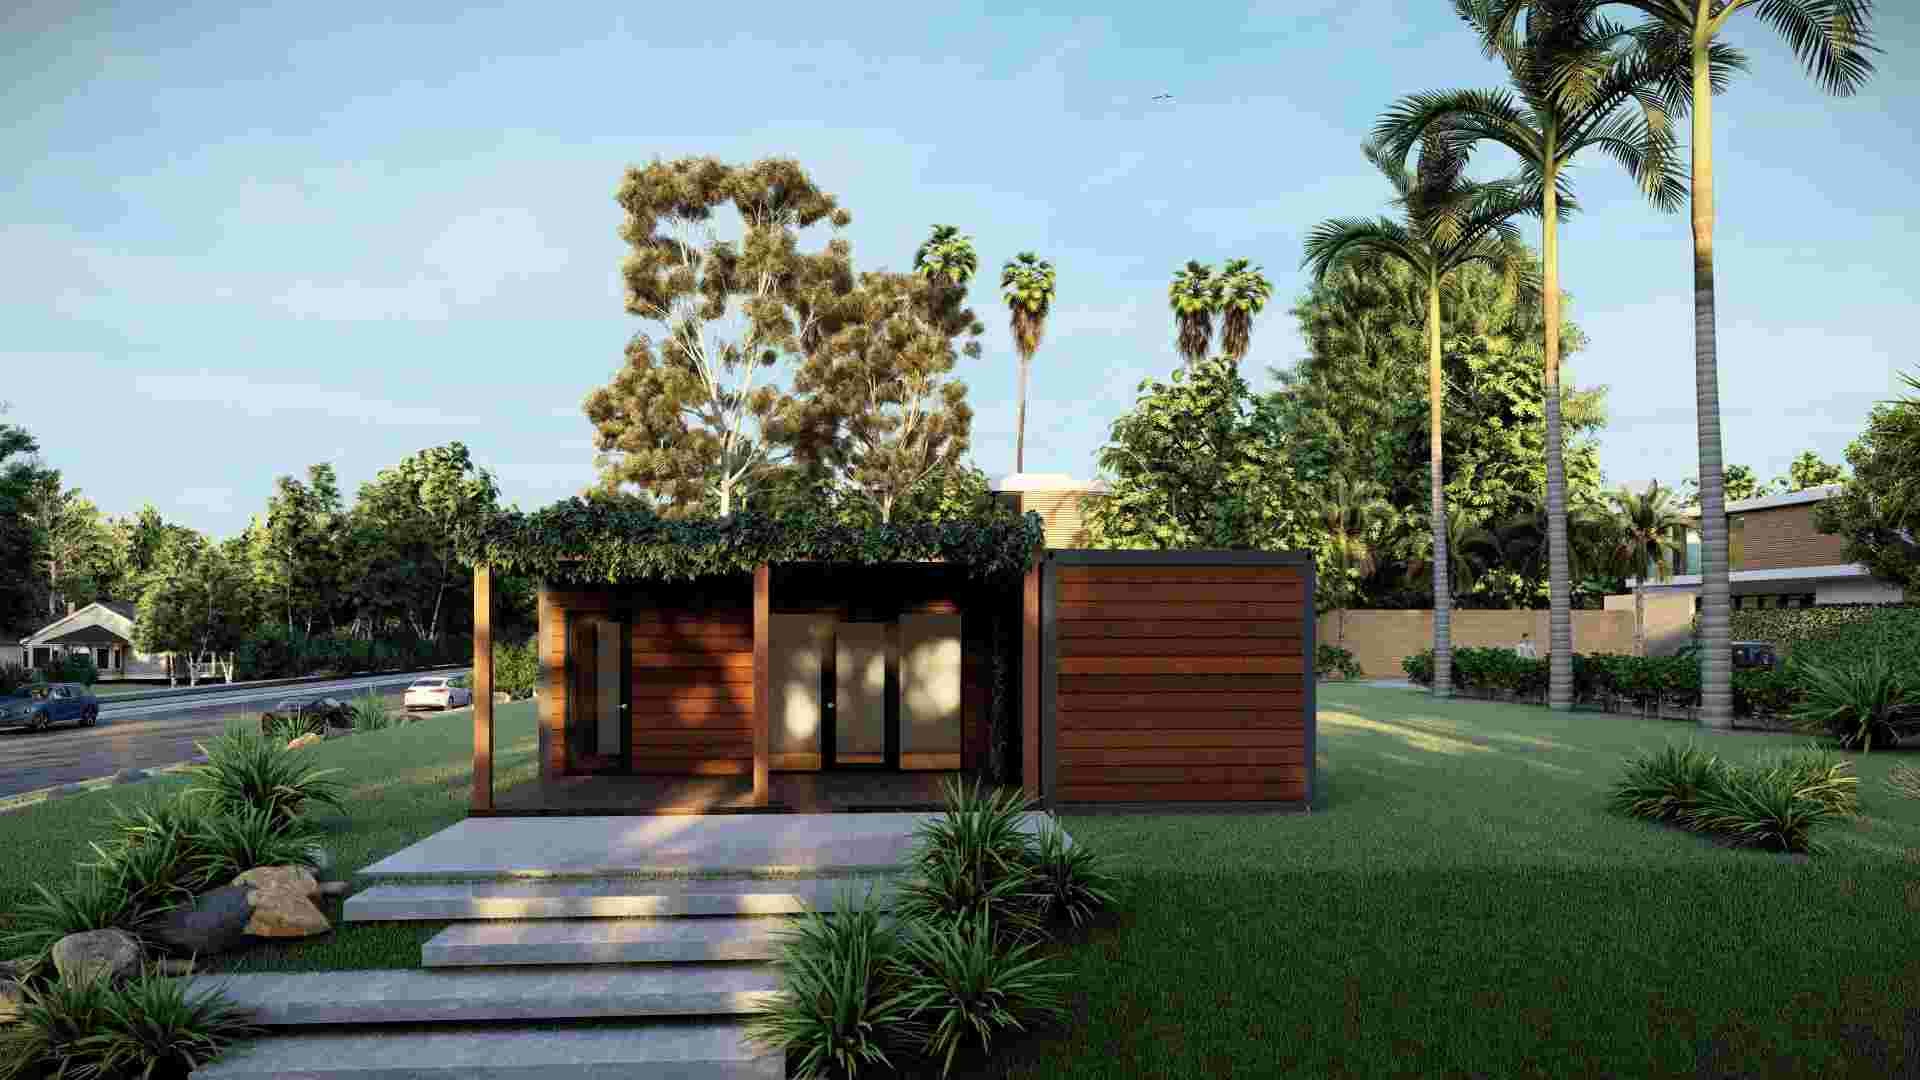 Superior Quality Combined Luxury Prefabricated Container Home Design-2X01